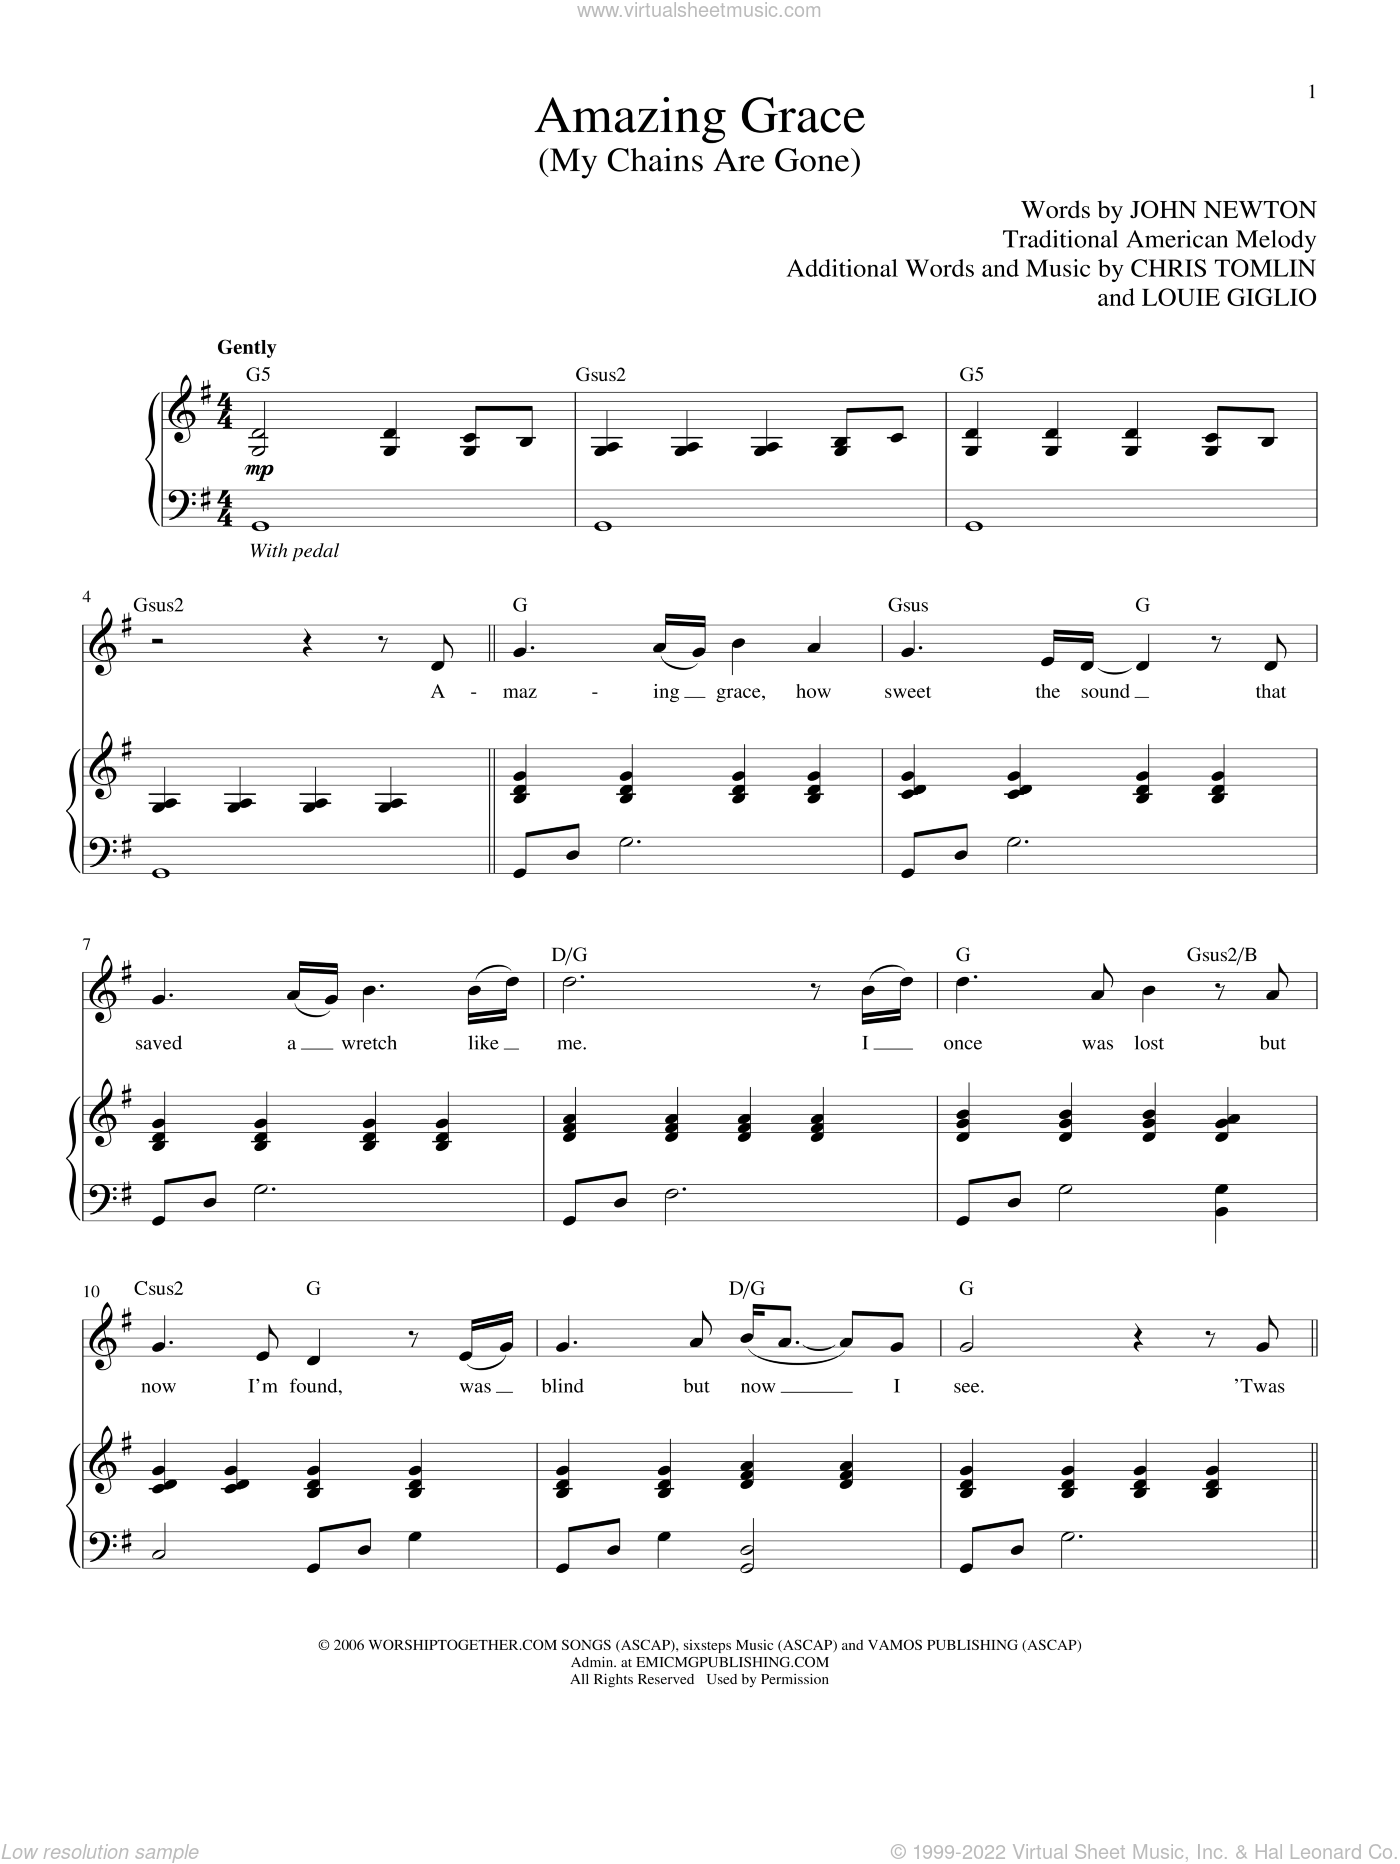 amazing-grace-my-chains-are-gone-sheet-music-pdf-chris-tomlin